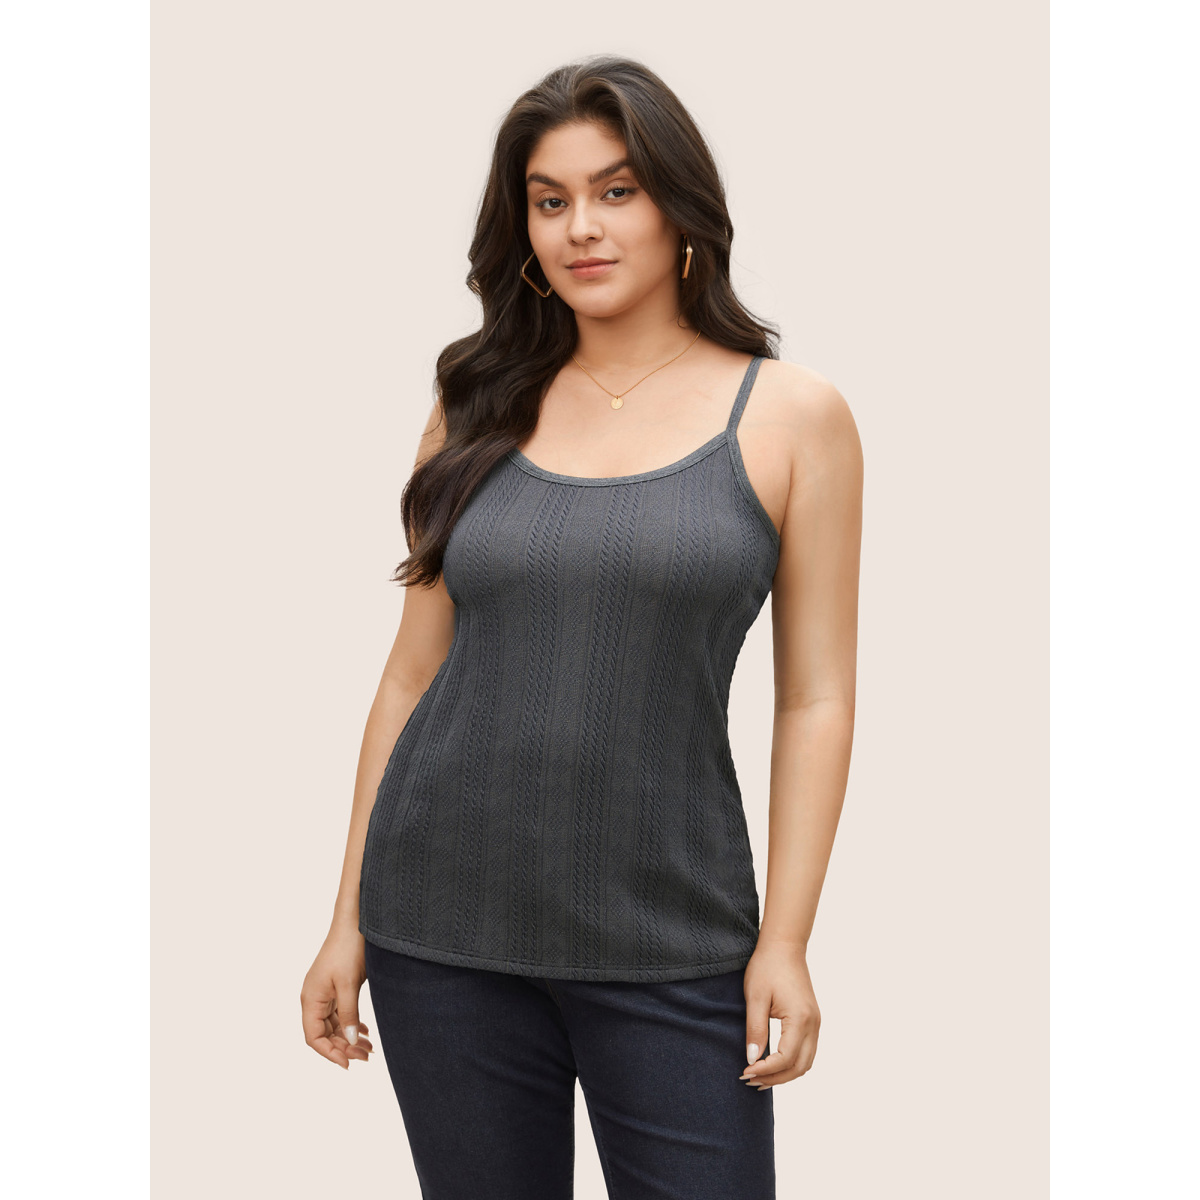 

Plus Size Textured Knit Adjustable Straps Cami Top Women DimGray Elegant Non Non Everyday Tank Tops Camis BloomChic